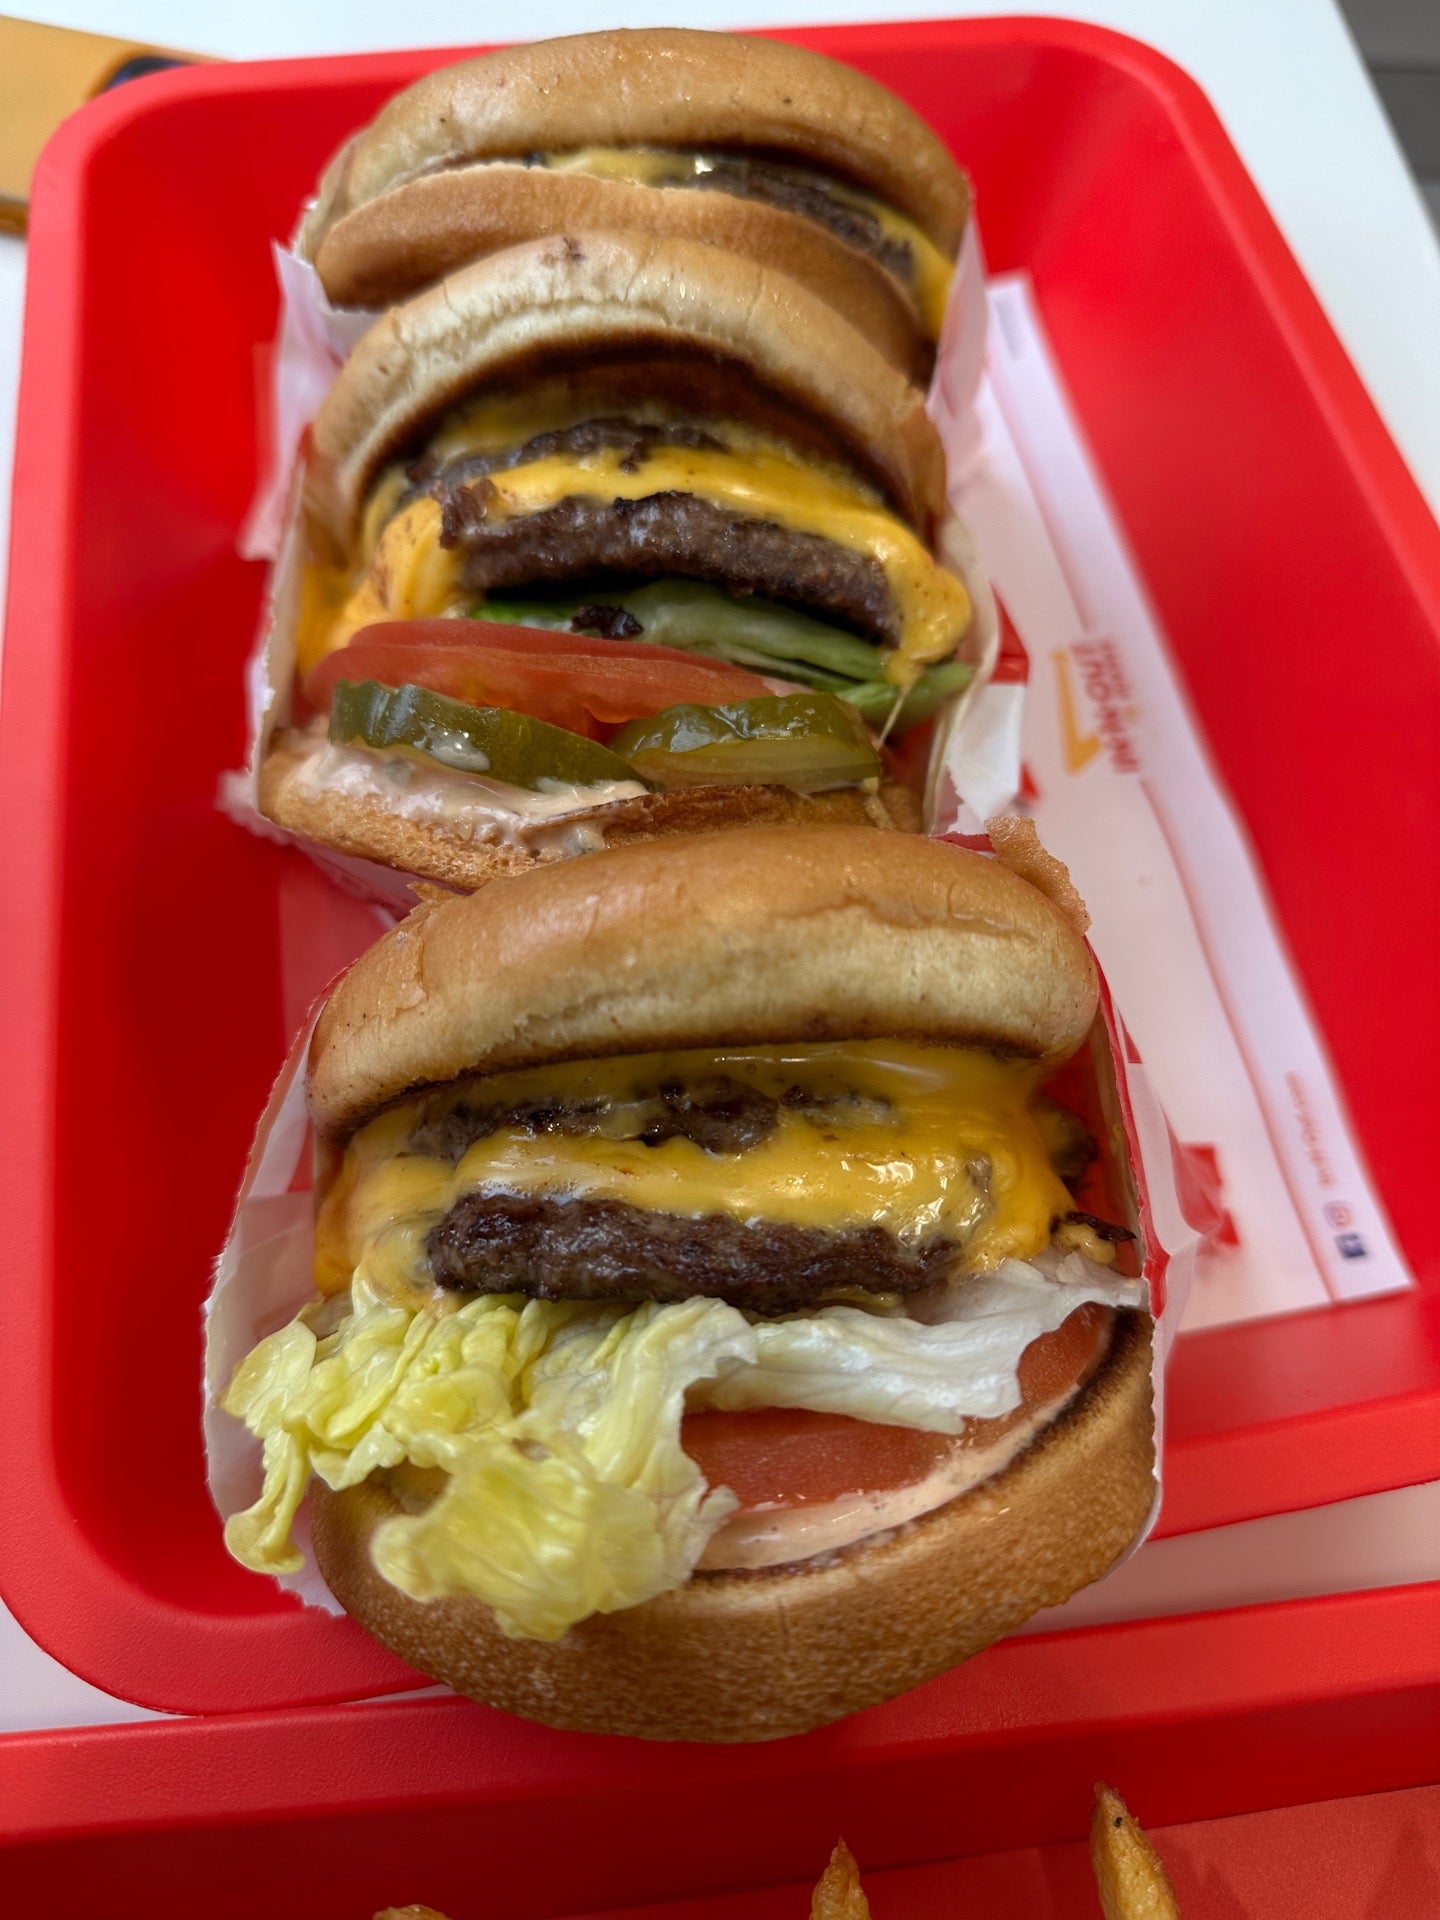 In-N-Out Burger